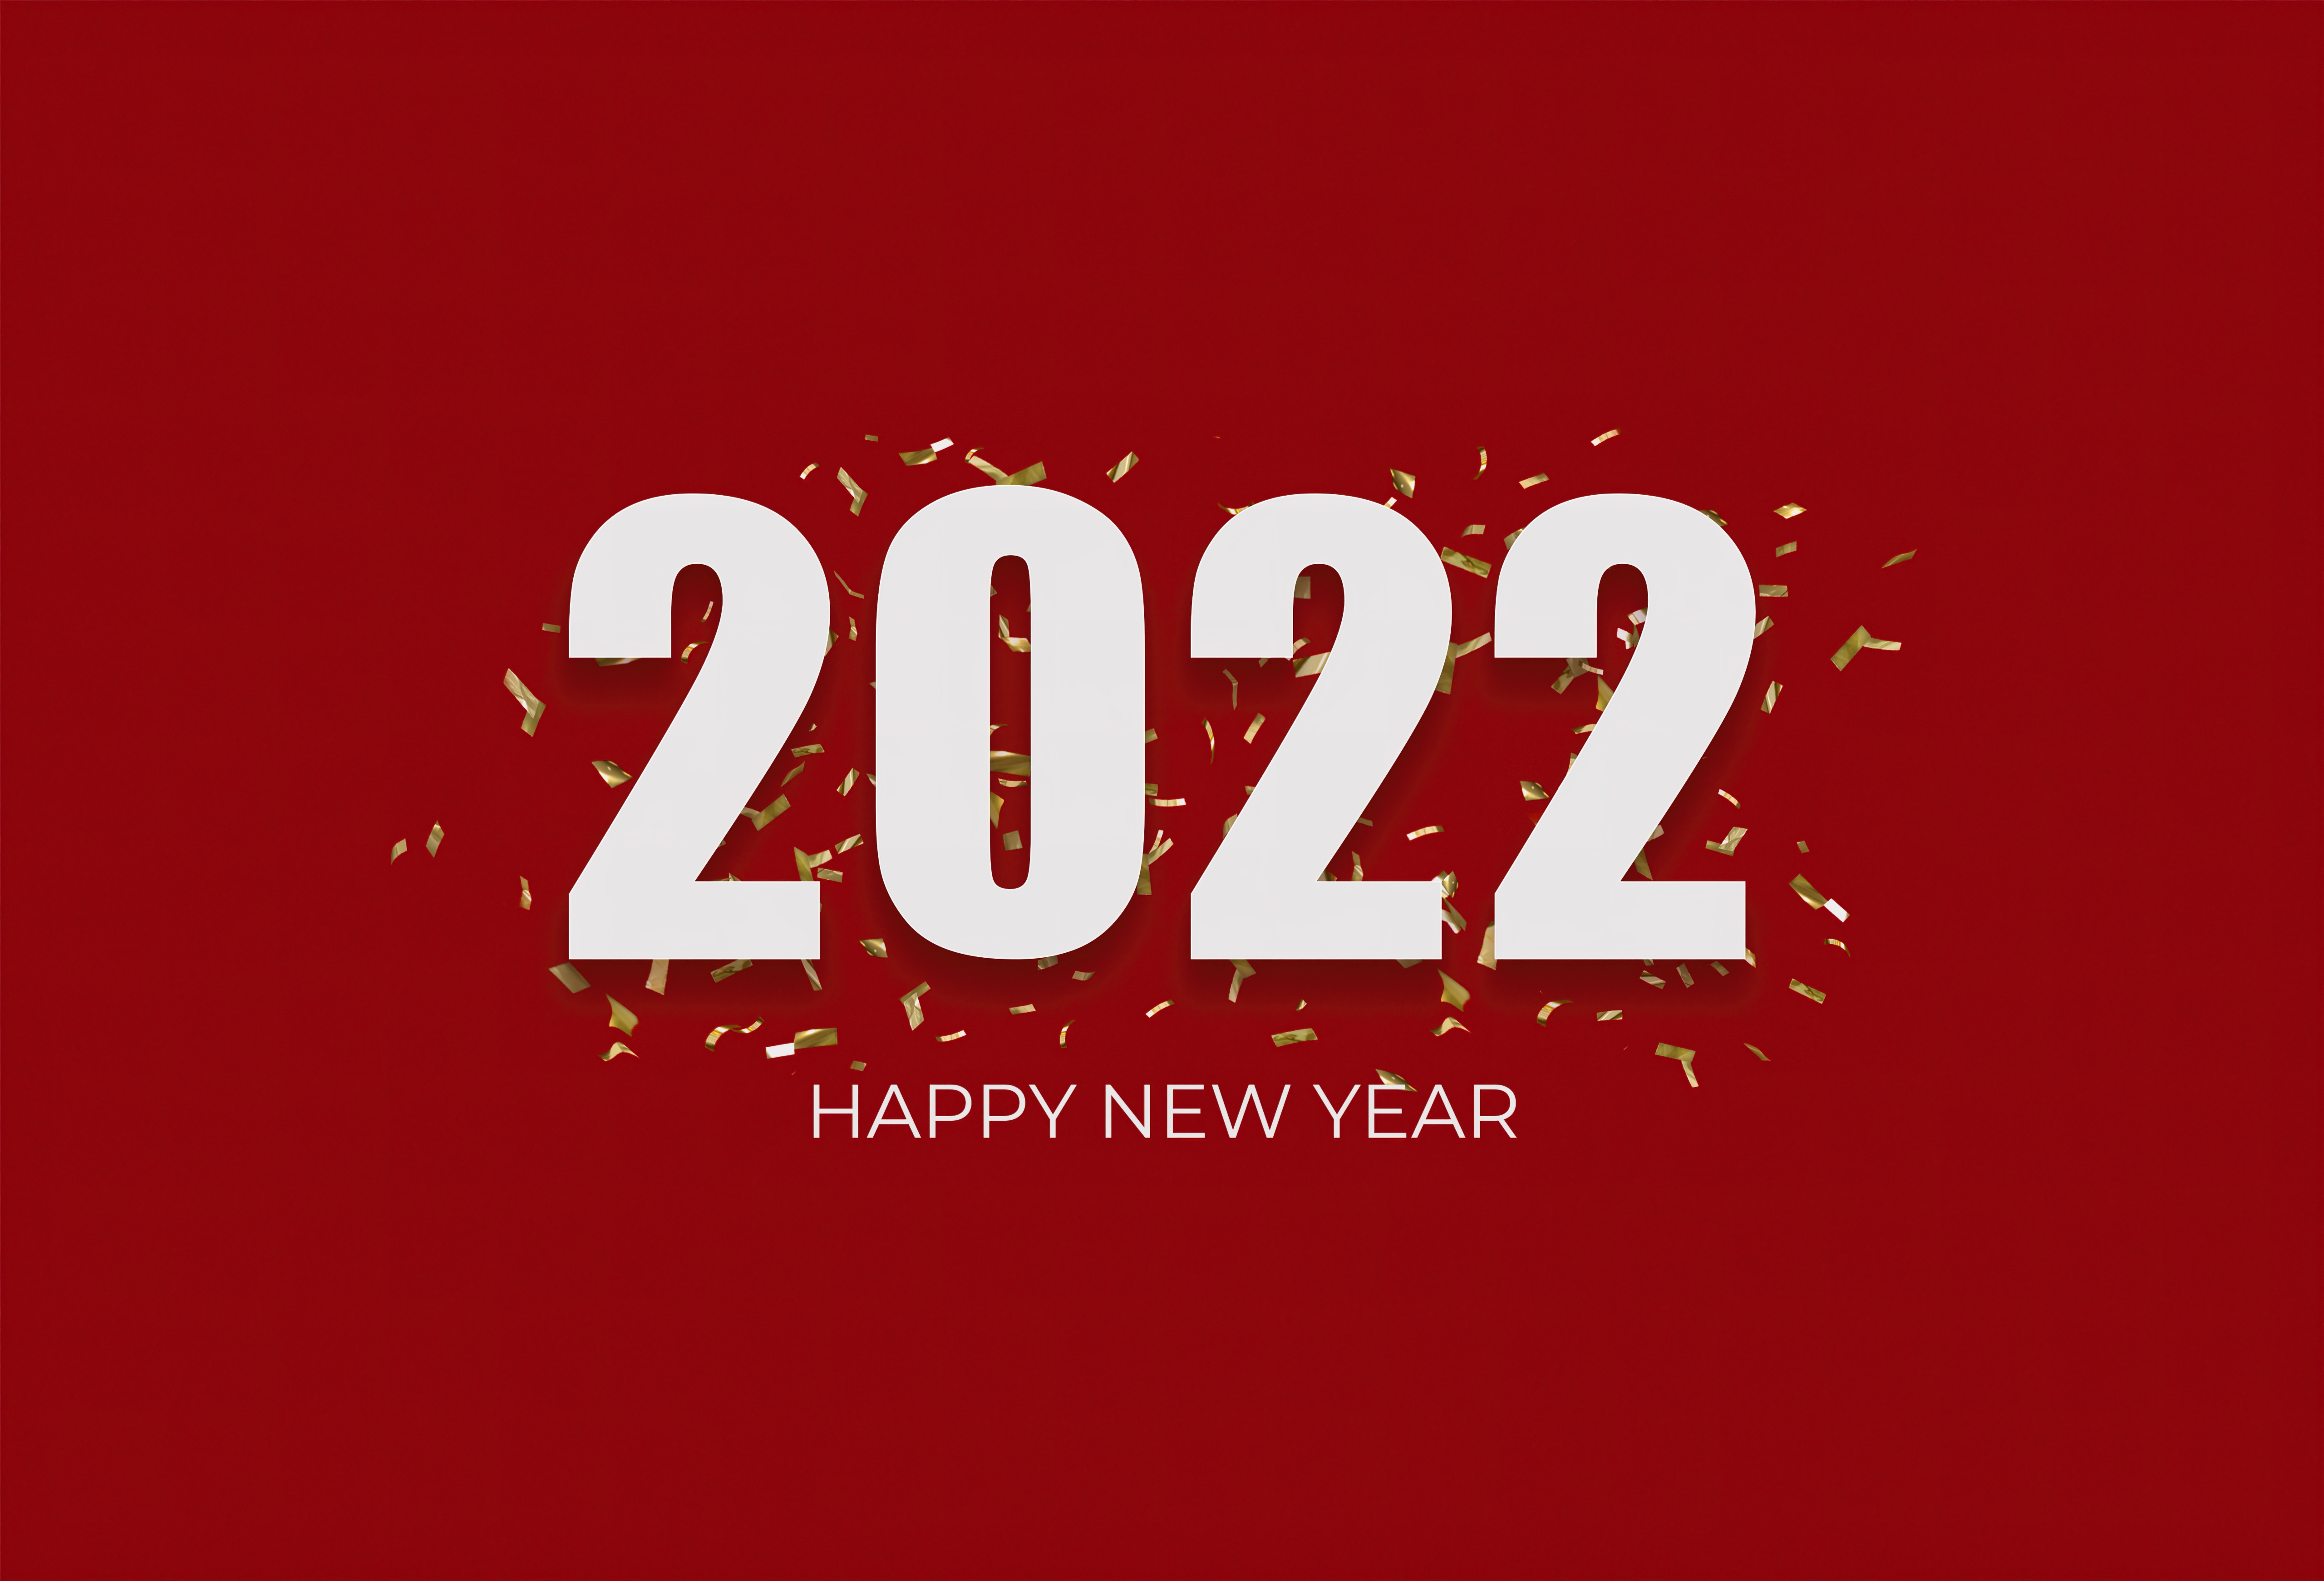 HD wallpaper, 5K, 2022 New Year, Happy New Year, Red Background